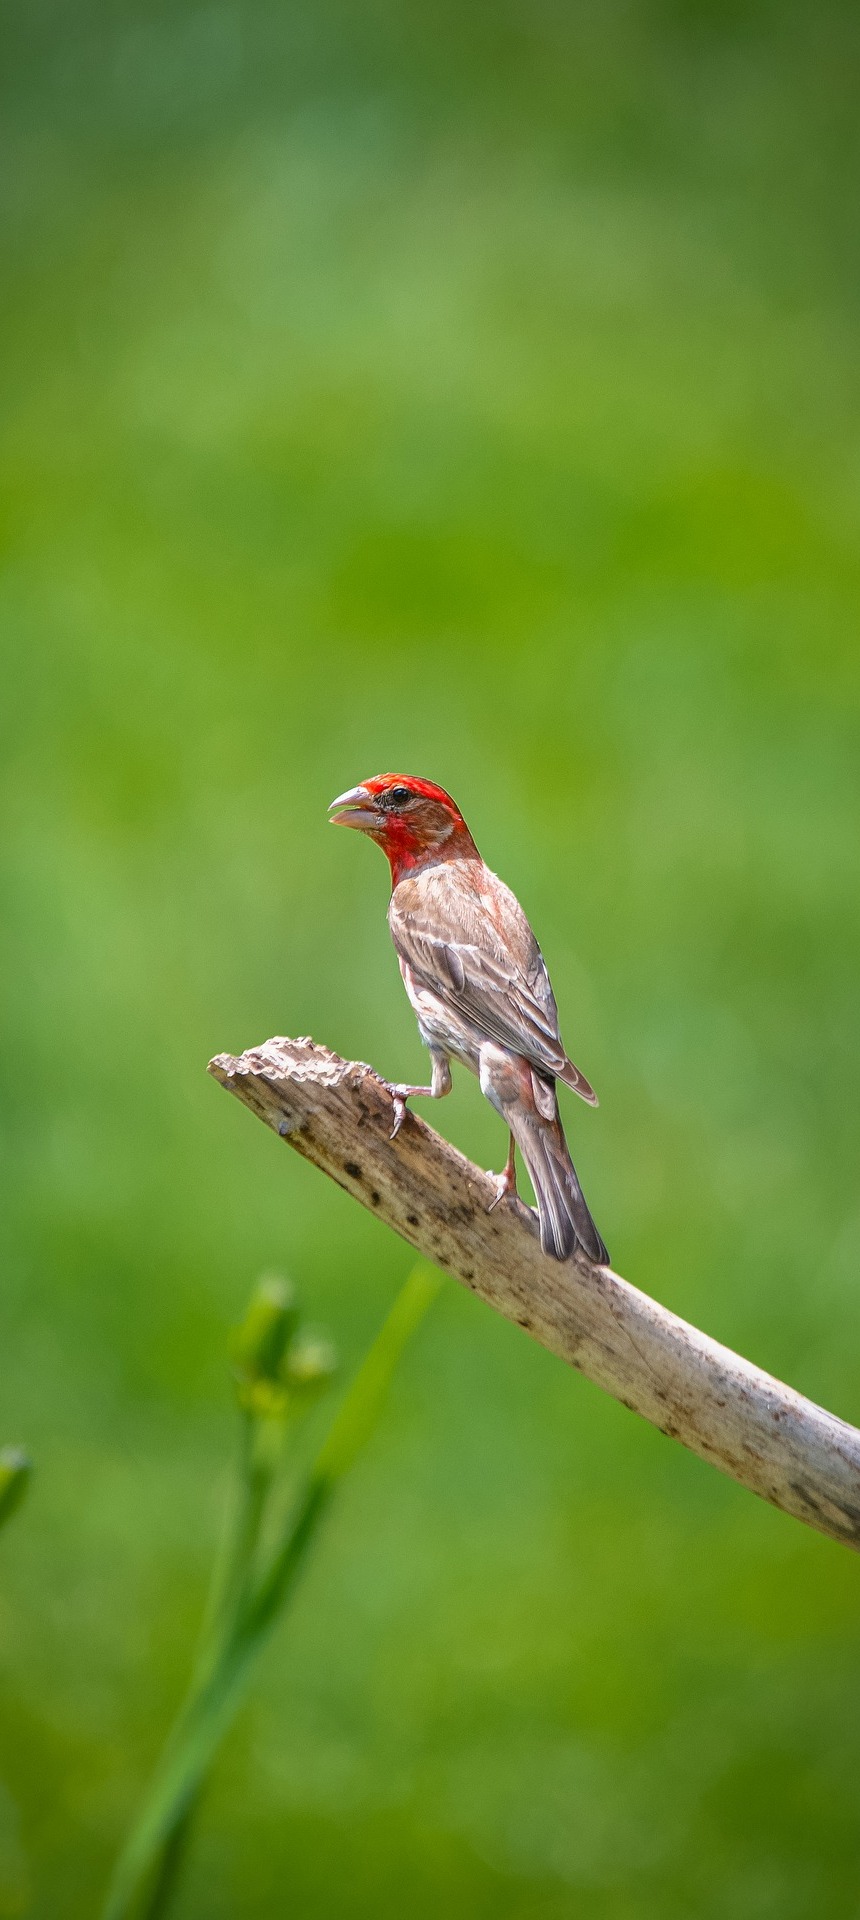 A cassin's finch.